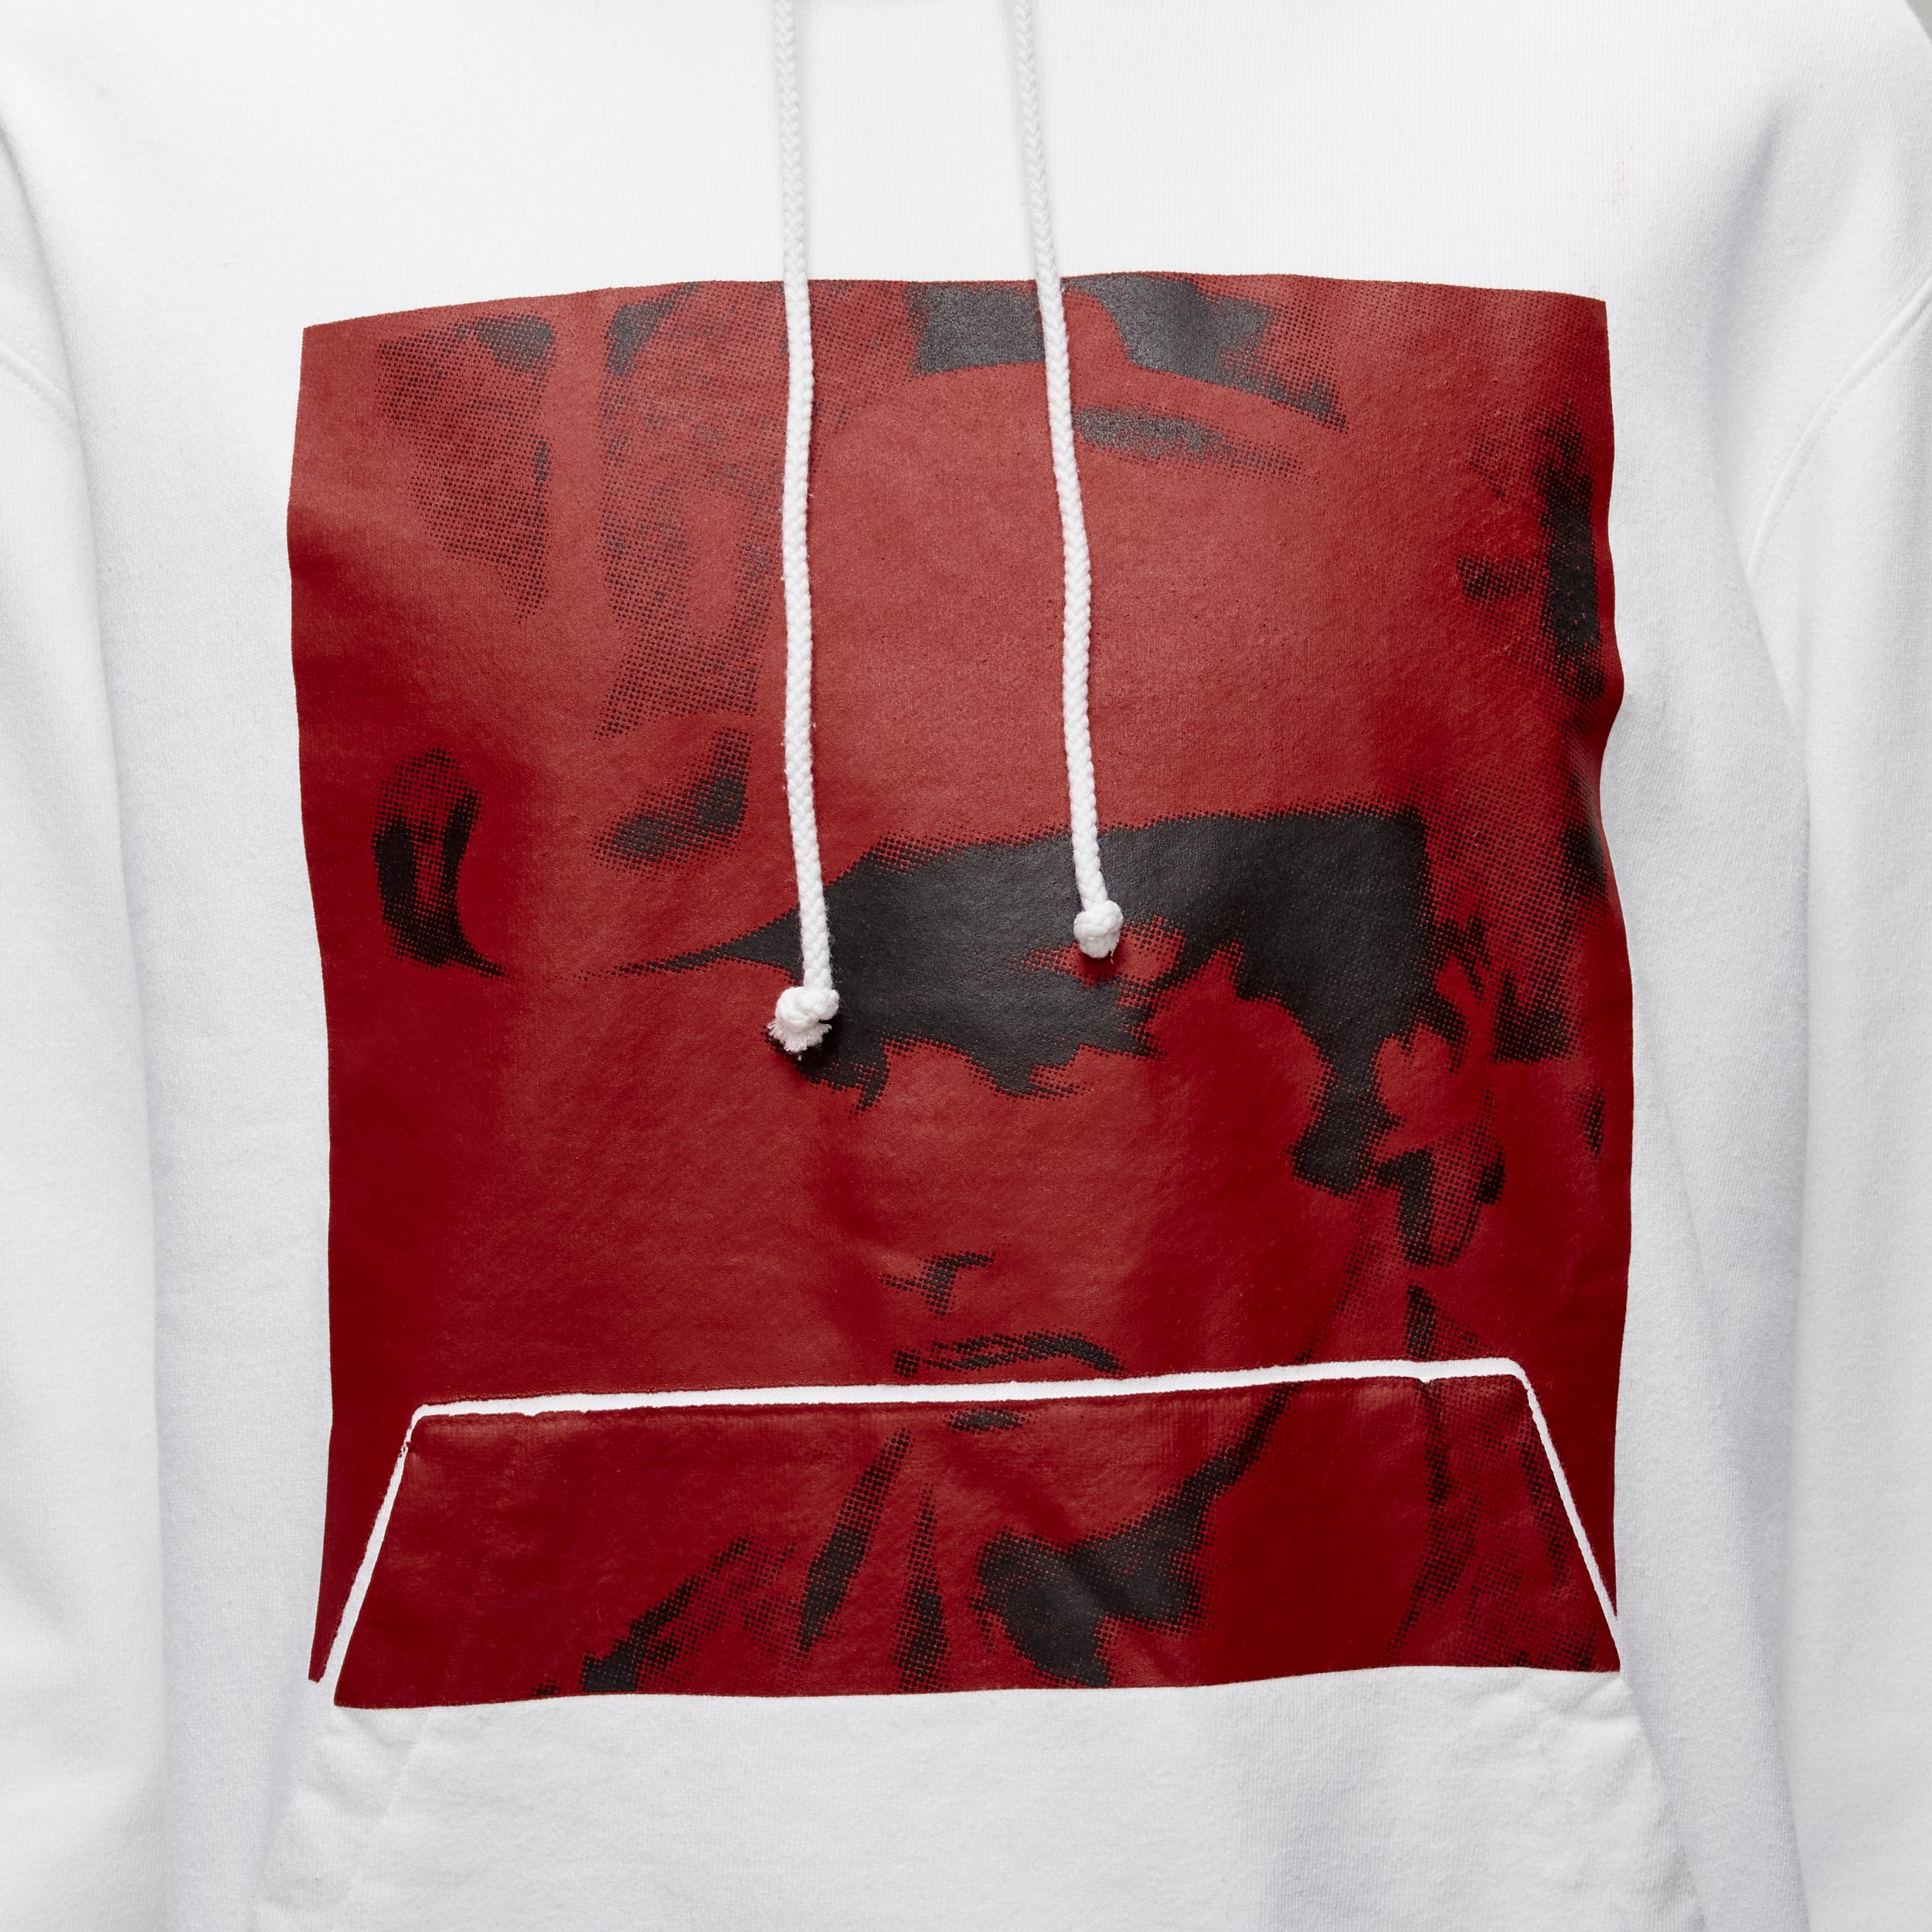 CALVIN KLEIN 205W39NYC 2018 ANDY WARHOL red Cowboy print hoodie M
Reference: YNWG/A00113
Brand: Calvin Klein
Designer: Raf Simons
Collection: 205W39NYC 2018 ANDY WARHOL
Material: Cotton
Color: Red, White
Pattern: Photographic Print
Closure: